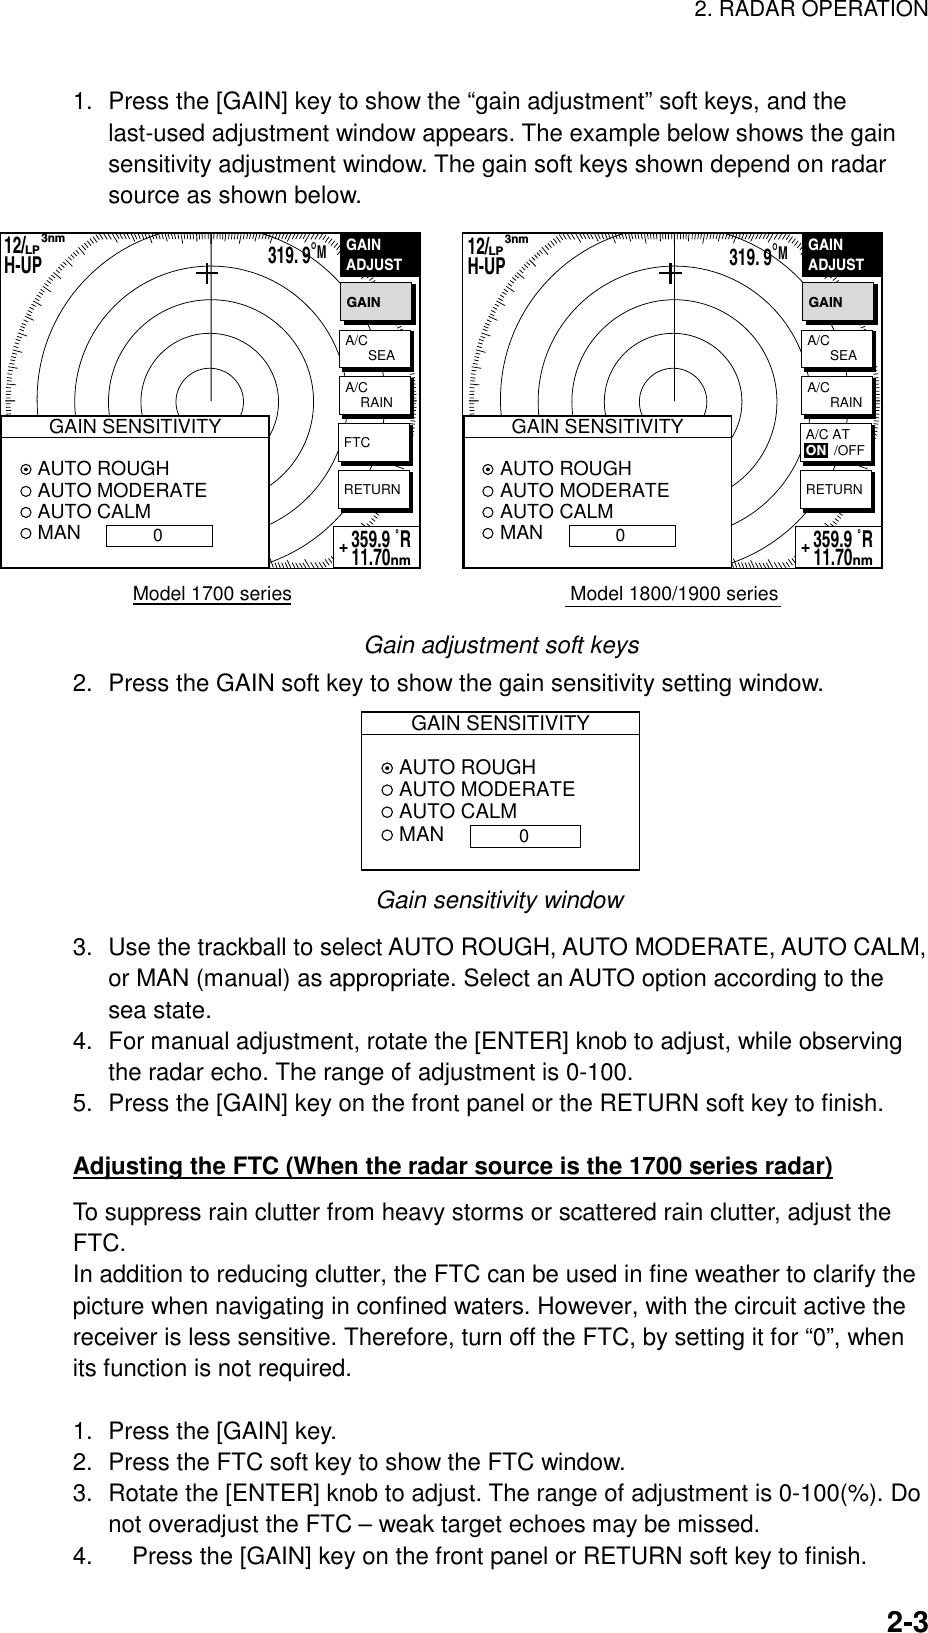 2. RADAR OPERATION    2-31.  Press the [GAIN] key to show the “gain adjustment” soft keys, and the last-used adjustment window appears. The example below shows the gain sensitivity adjustment window. The gain soft keys shown depend on radar source as shown below. Model 1800/1900 seriesGAINADJUSTGAINRETURN319. 9°M359.9 ˚R 11.70nm+Model 1700 seriesGAINADJUSTGAINRETURN12/        H-UP      3nmLP359.9 ˚R 11.70nm+A/C      SEAA/C    RAINFTCA/C      SEAA/C      RAINA/C ATON  /OFF12/        H-UP      3nmLP319. 9°MGAIN SENSITIVITY AUTO ROUGH AUTO MODERATE AUTO CALM MAN 0GAIN SENSITIVITY AUTO ROUGH AUTO MODERATE AUTO CALM MAN 0 Gain adjustment soft keys 2.  Press the GAIN soft key to show the gain sensitivity setting window. GAIN SENSITIVITY AUTO ROUGH AUTO MODERATE AUTO CALM MAN0 Gain sensitivity window 3.  Use the trackball to select AUTO ROUGH, AUTO MODERATE, AUTO CALM, or MAN (manual) as appropriate. Select an AUTO option according to the sea state. 4.  For manual adjustment, rotate the [ENTER] knob to adjust, while observing the radar echo. The range of adjustment is 0-100.   5.  Press the [GAIN] key on the front panel or the RETURN soft key to finish.  Adjusting the FTC (When the radar source is the 1700 series radar) To suppress rain clutter from heavy storms or scattered rain clutter, adjust the FTC.  In addition to reducing clutter, the FTC can be used in fine weather to clarify the picture when navigating in confined waters. However, with the circuit active the receiver is less sensitive. Therefore, turn off the FTC, by setting it for “0”, when its function is not required.  1.  Press the [GAIN] key. 2.  Press the FTC soft key to show the FTC window. 3.  Rotate the [ENTER] knob to adjust. The range of adjustment is 0-100(%). Do not overadjust the FTC – weak target echoes may be missed. 4.  Press the [GAIN] key on the front panel or RETURN soft key to finish. 